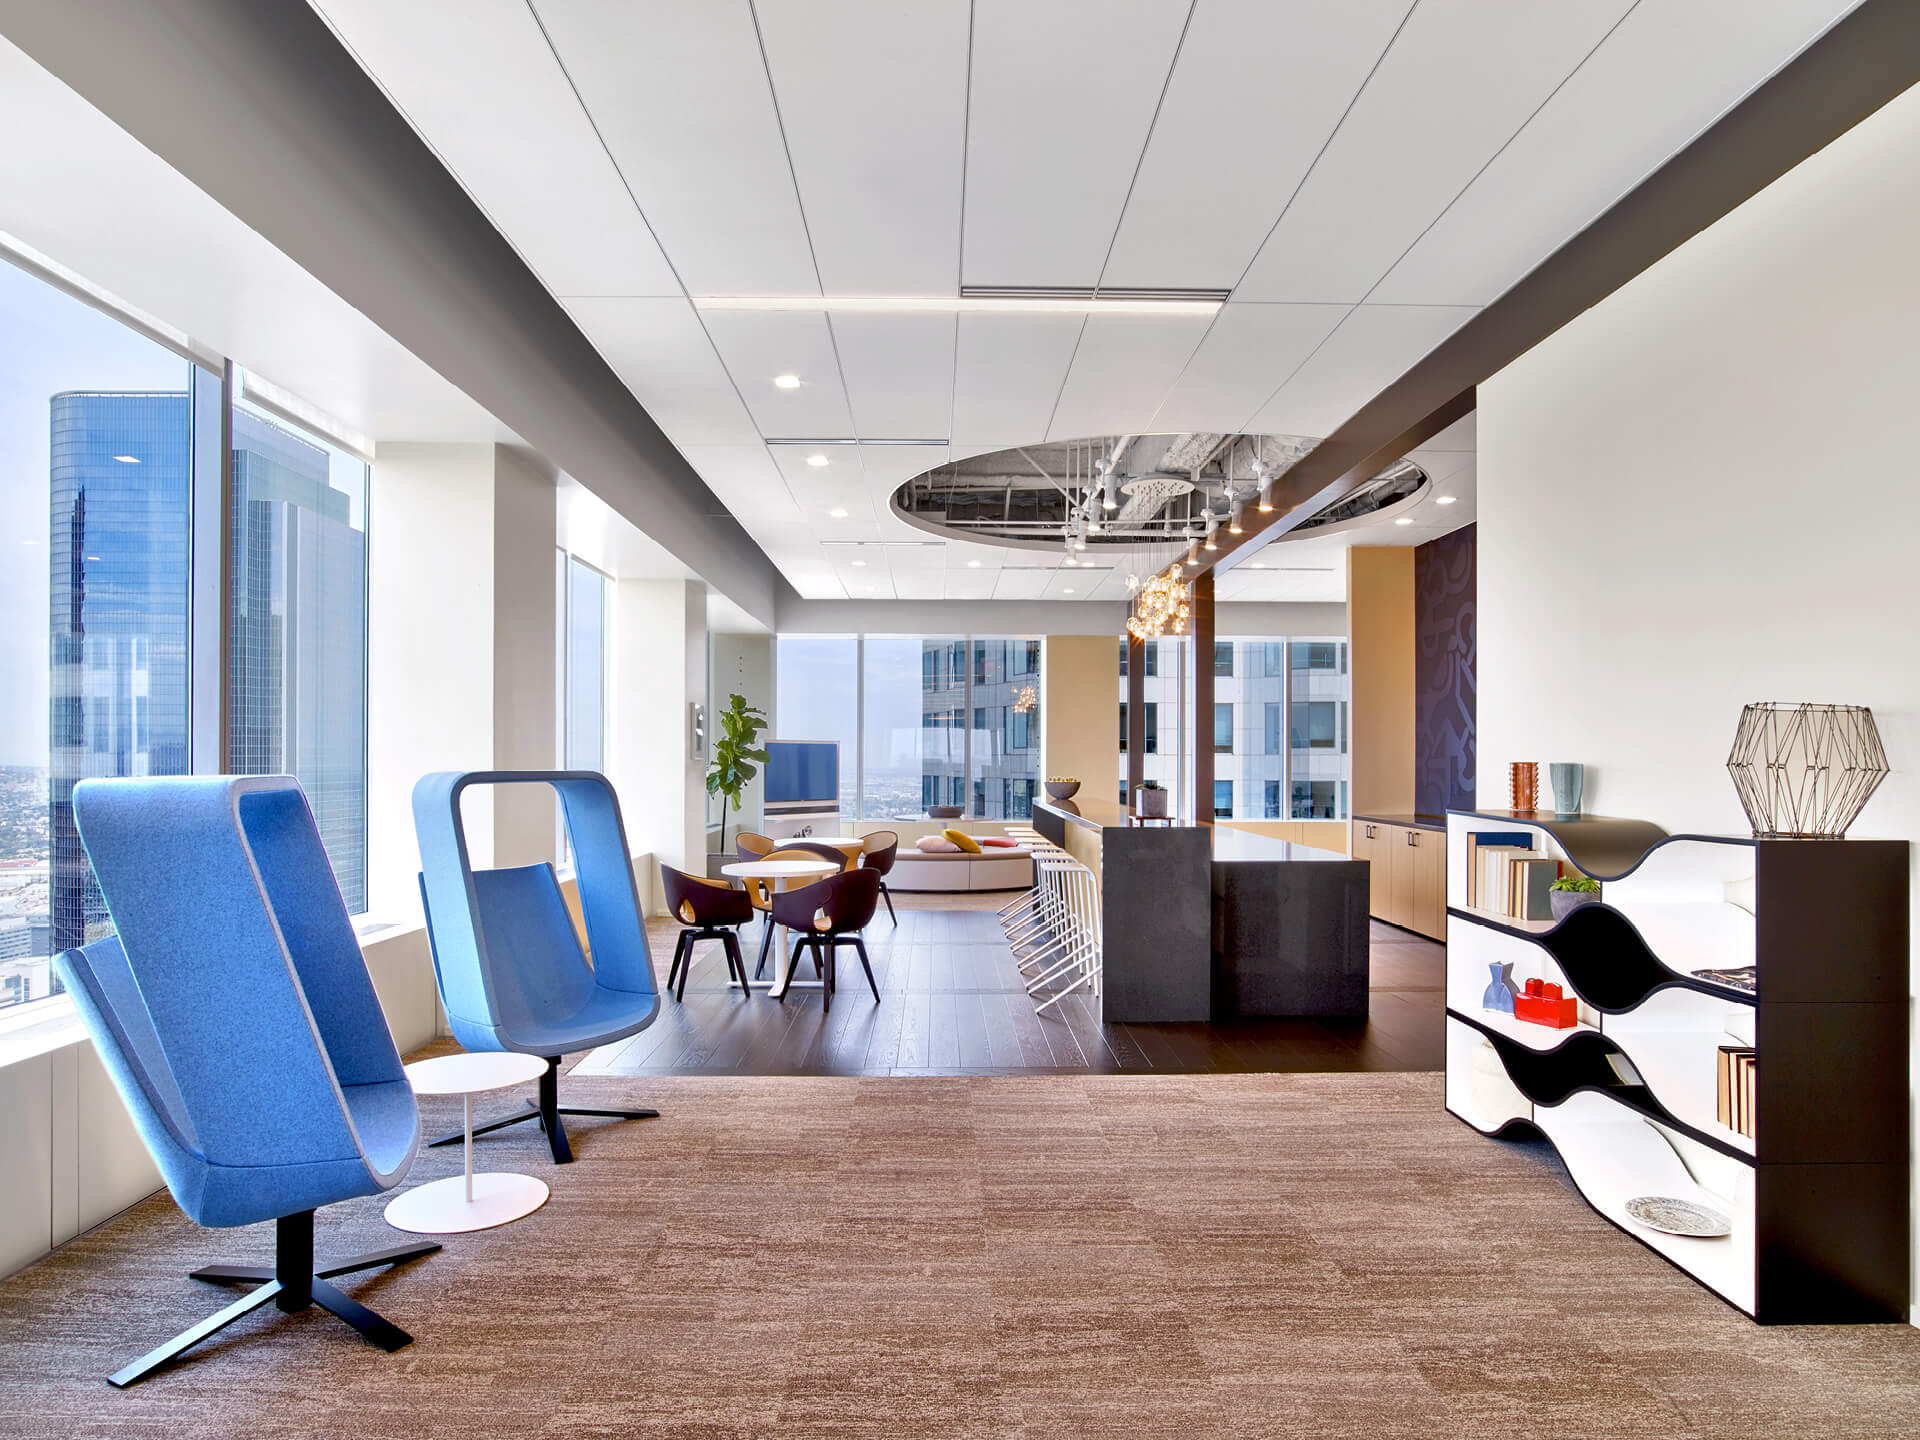 Haworth Mike Maaike Designer blue chairs in office collaboration area